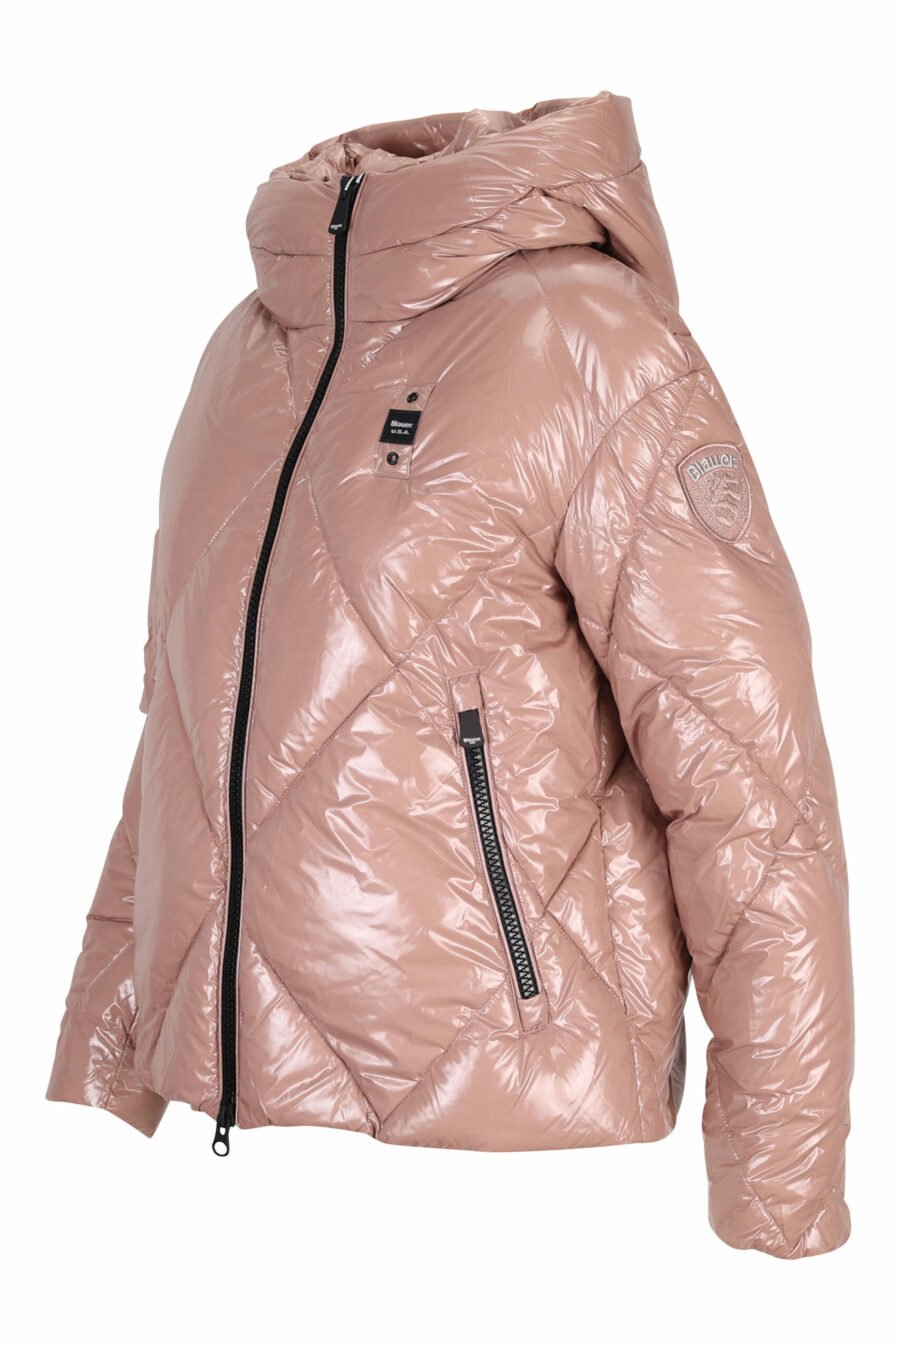 Pale pink hooded jacket with diagonal lines and logo patch - 8058610611965 1 scaled